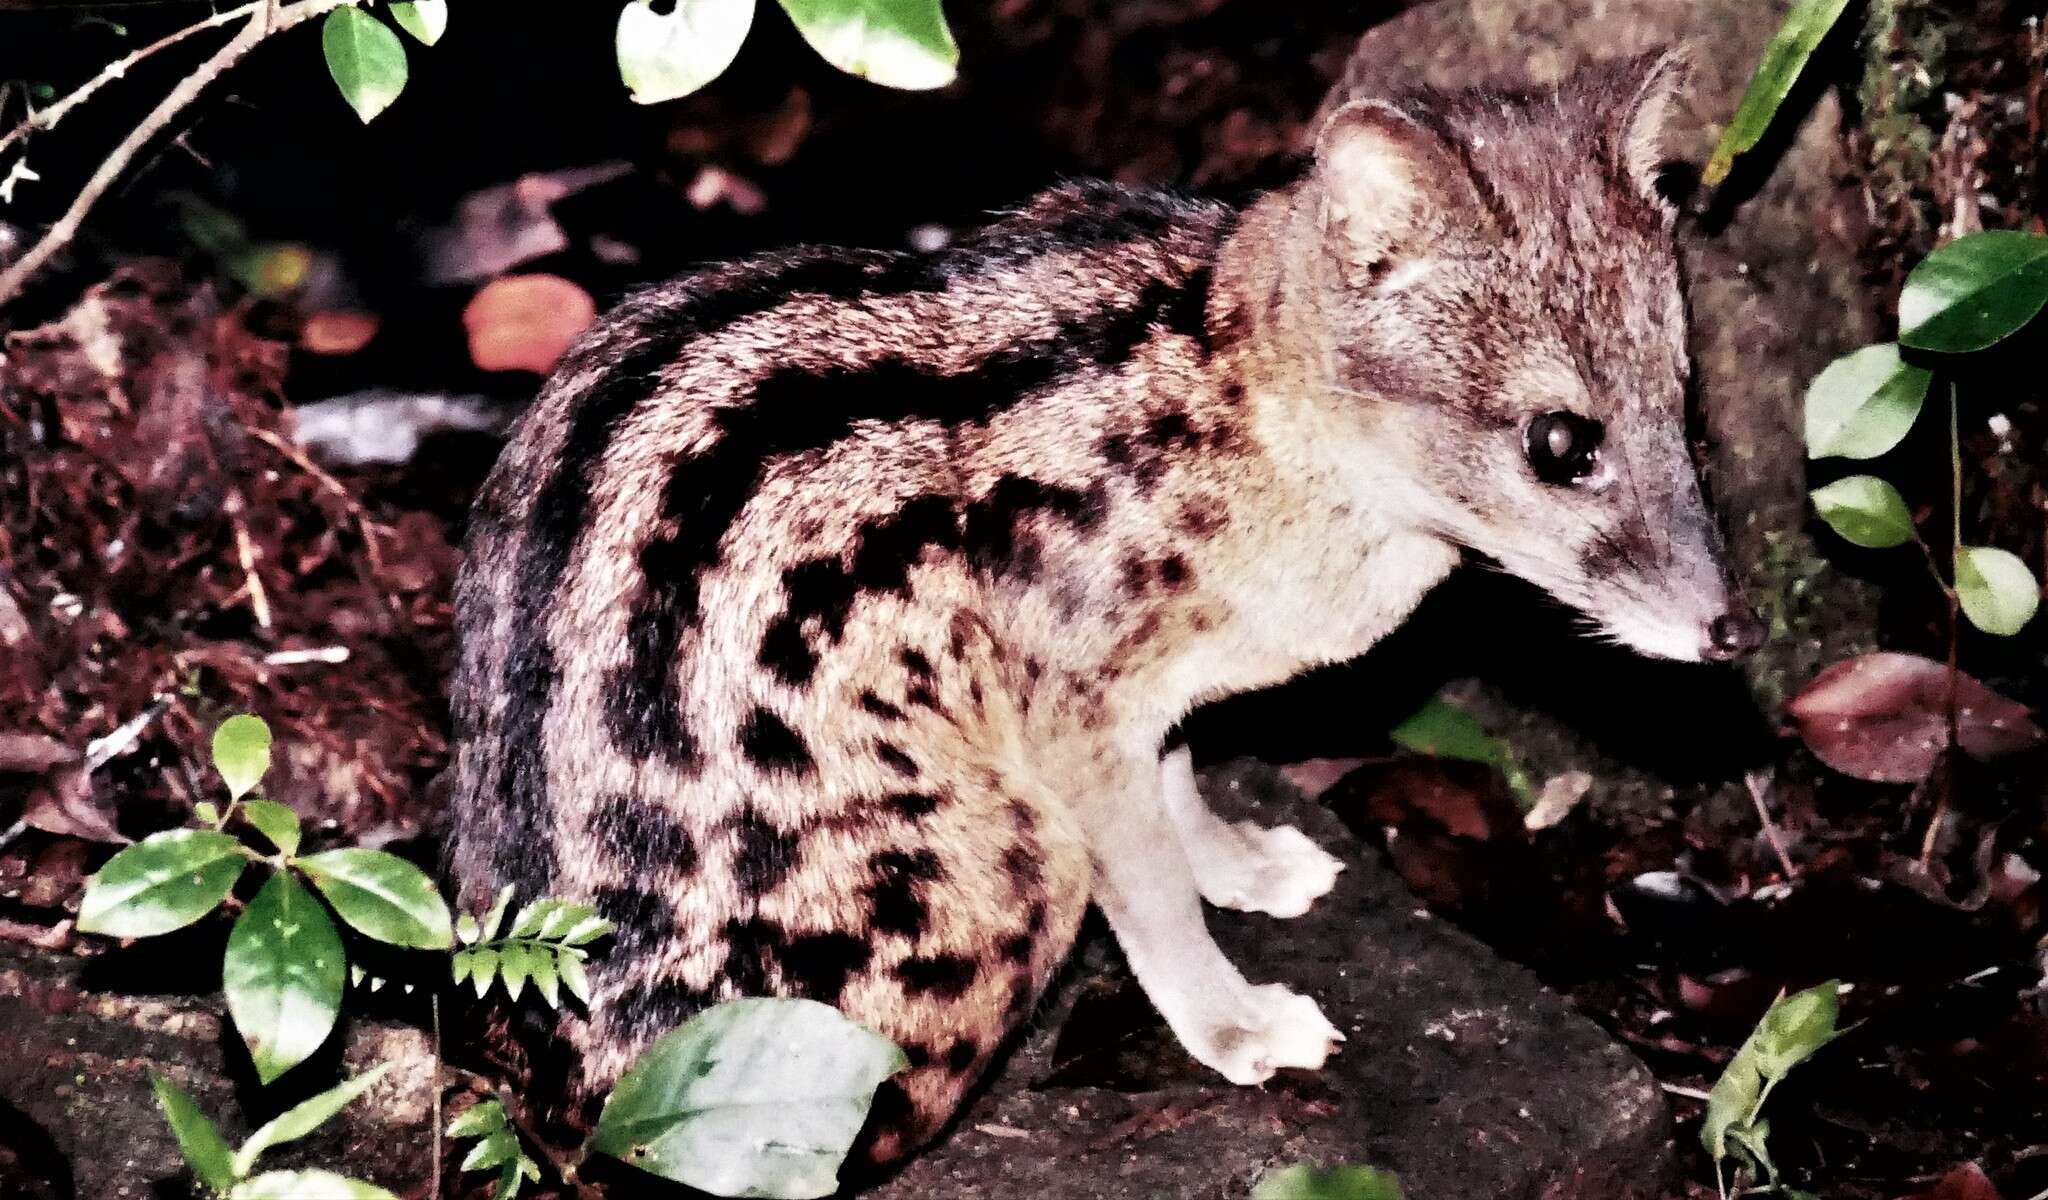 Image of Malagasy civet